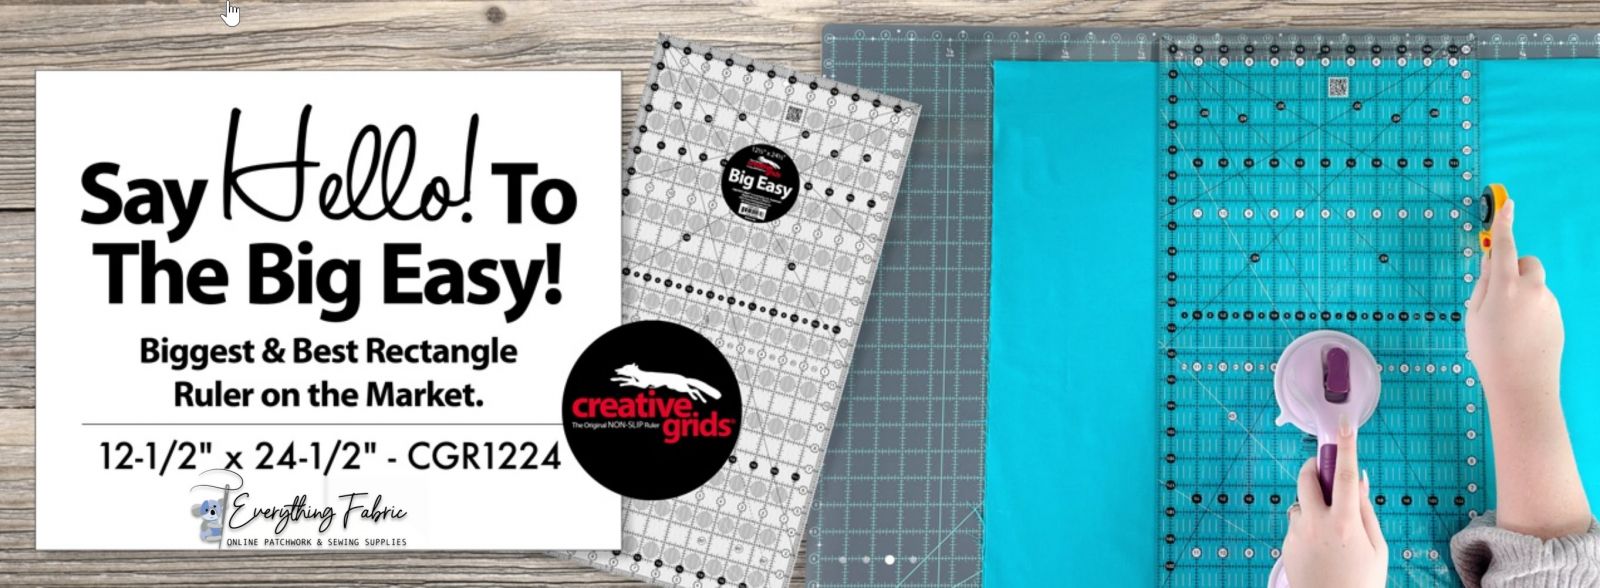 Creative Grids CGR1224 - The Big Easy QUilting Ruler